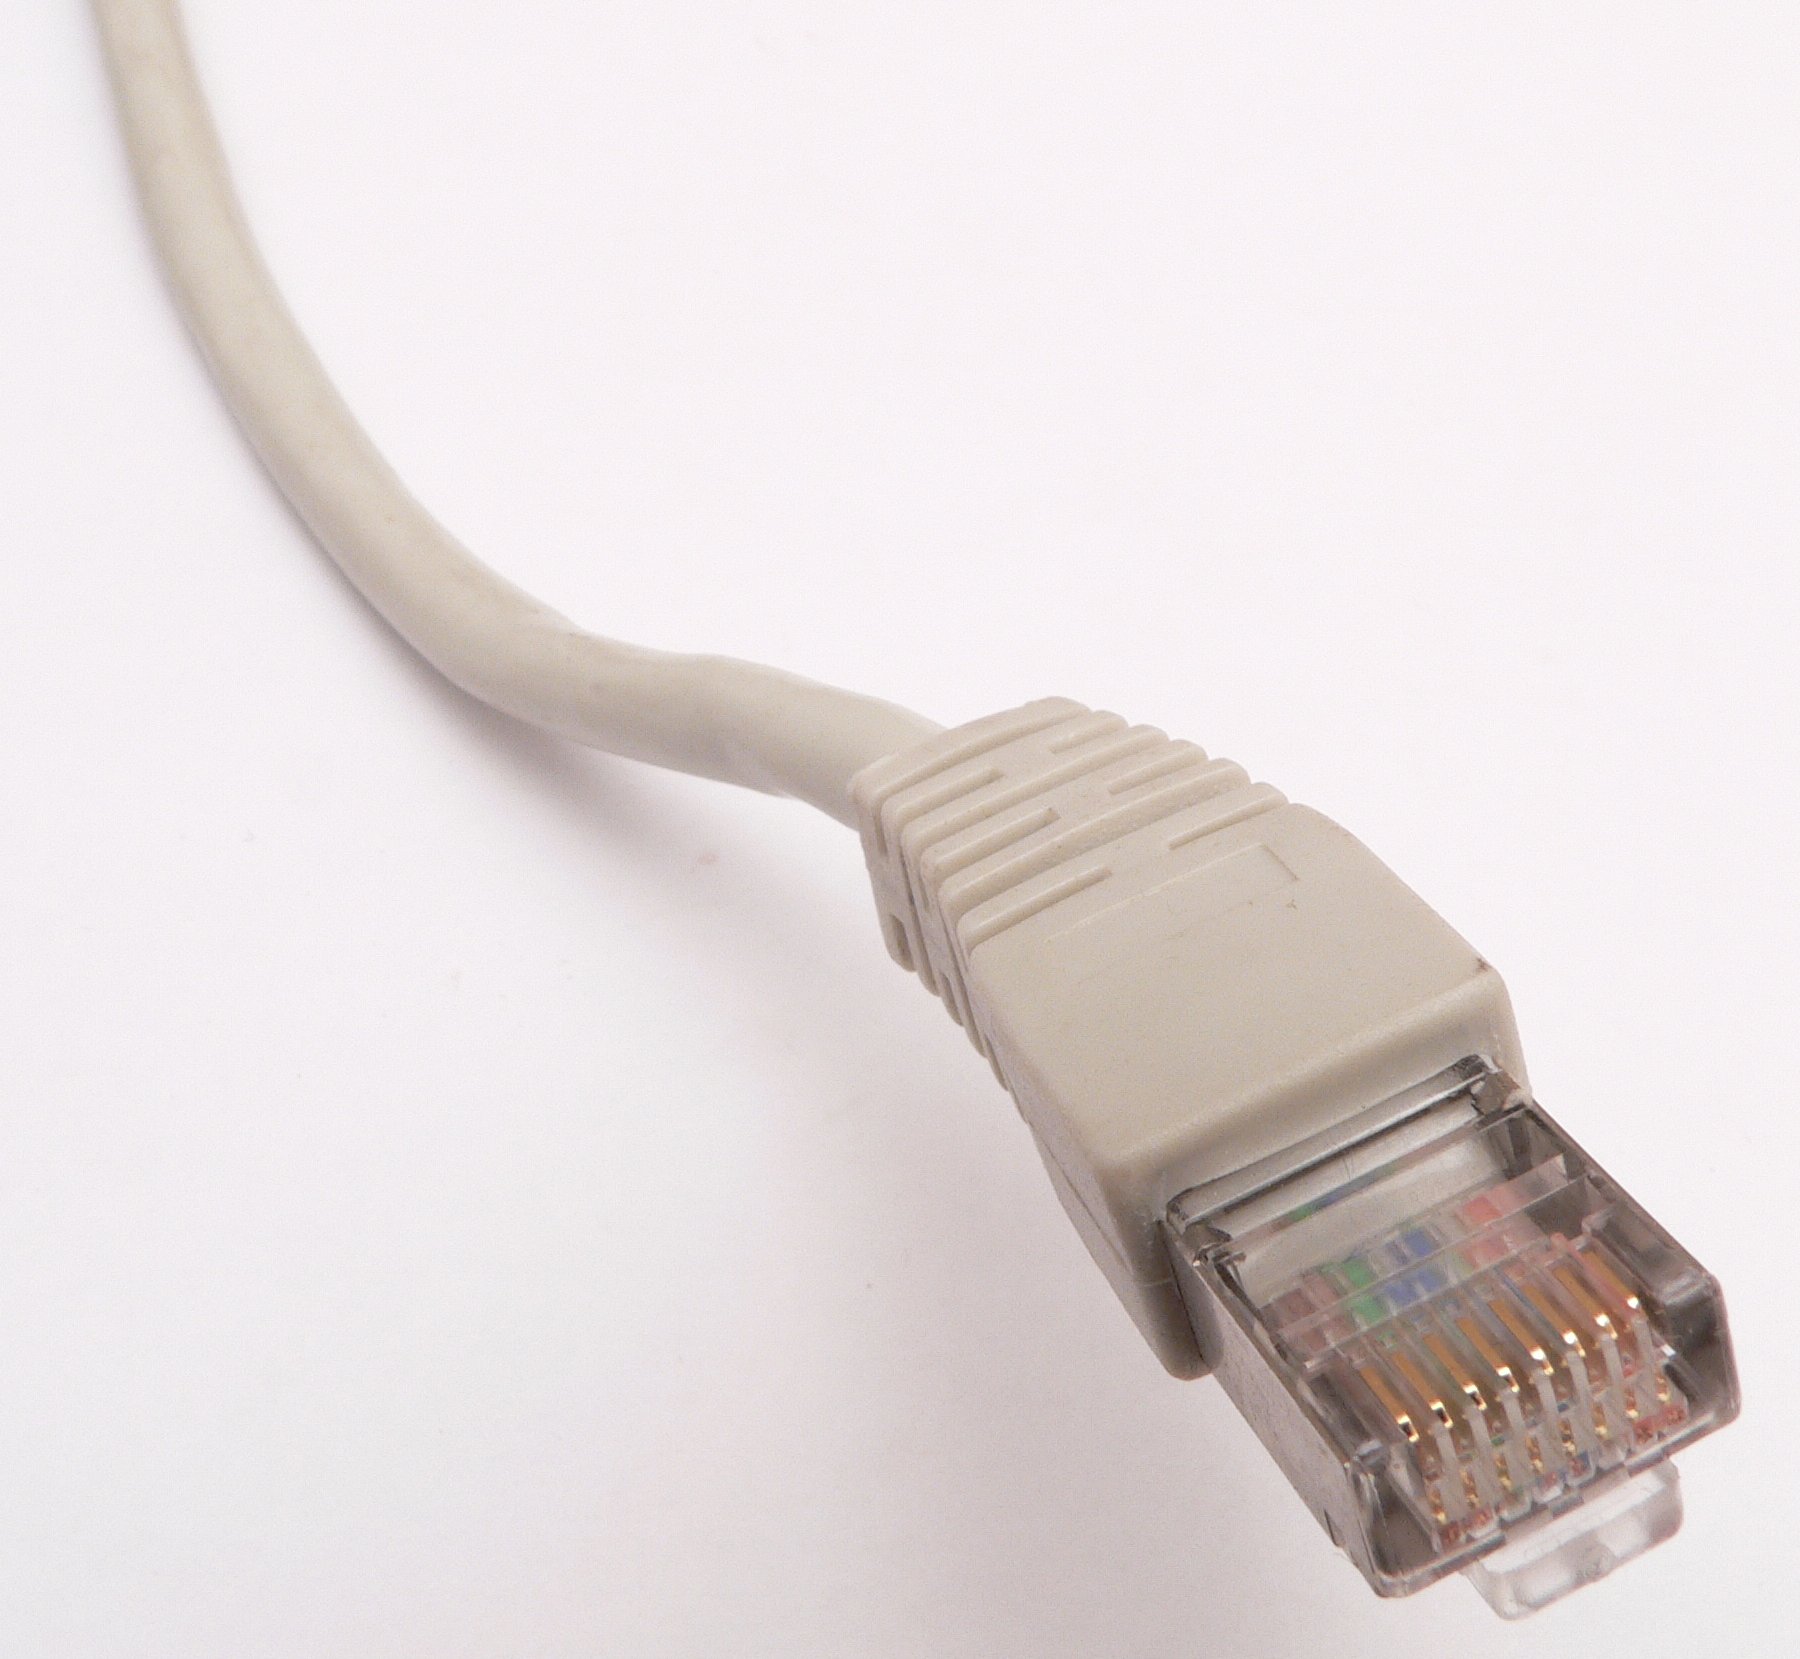 1-21- Cable de red- Ethernet_RJ45_connector_p1160054- Fuente: http://upload-wikimedia-org/wikipedia/commons/d/d7/Ethernet_RJ45_connector_p1160054-jpg